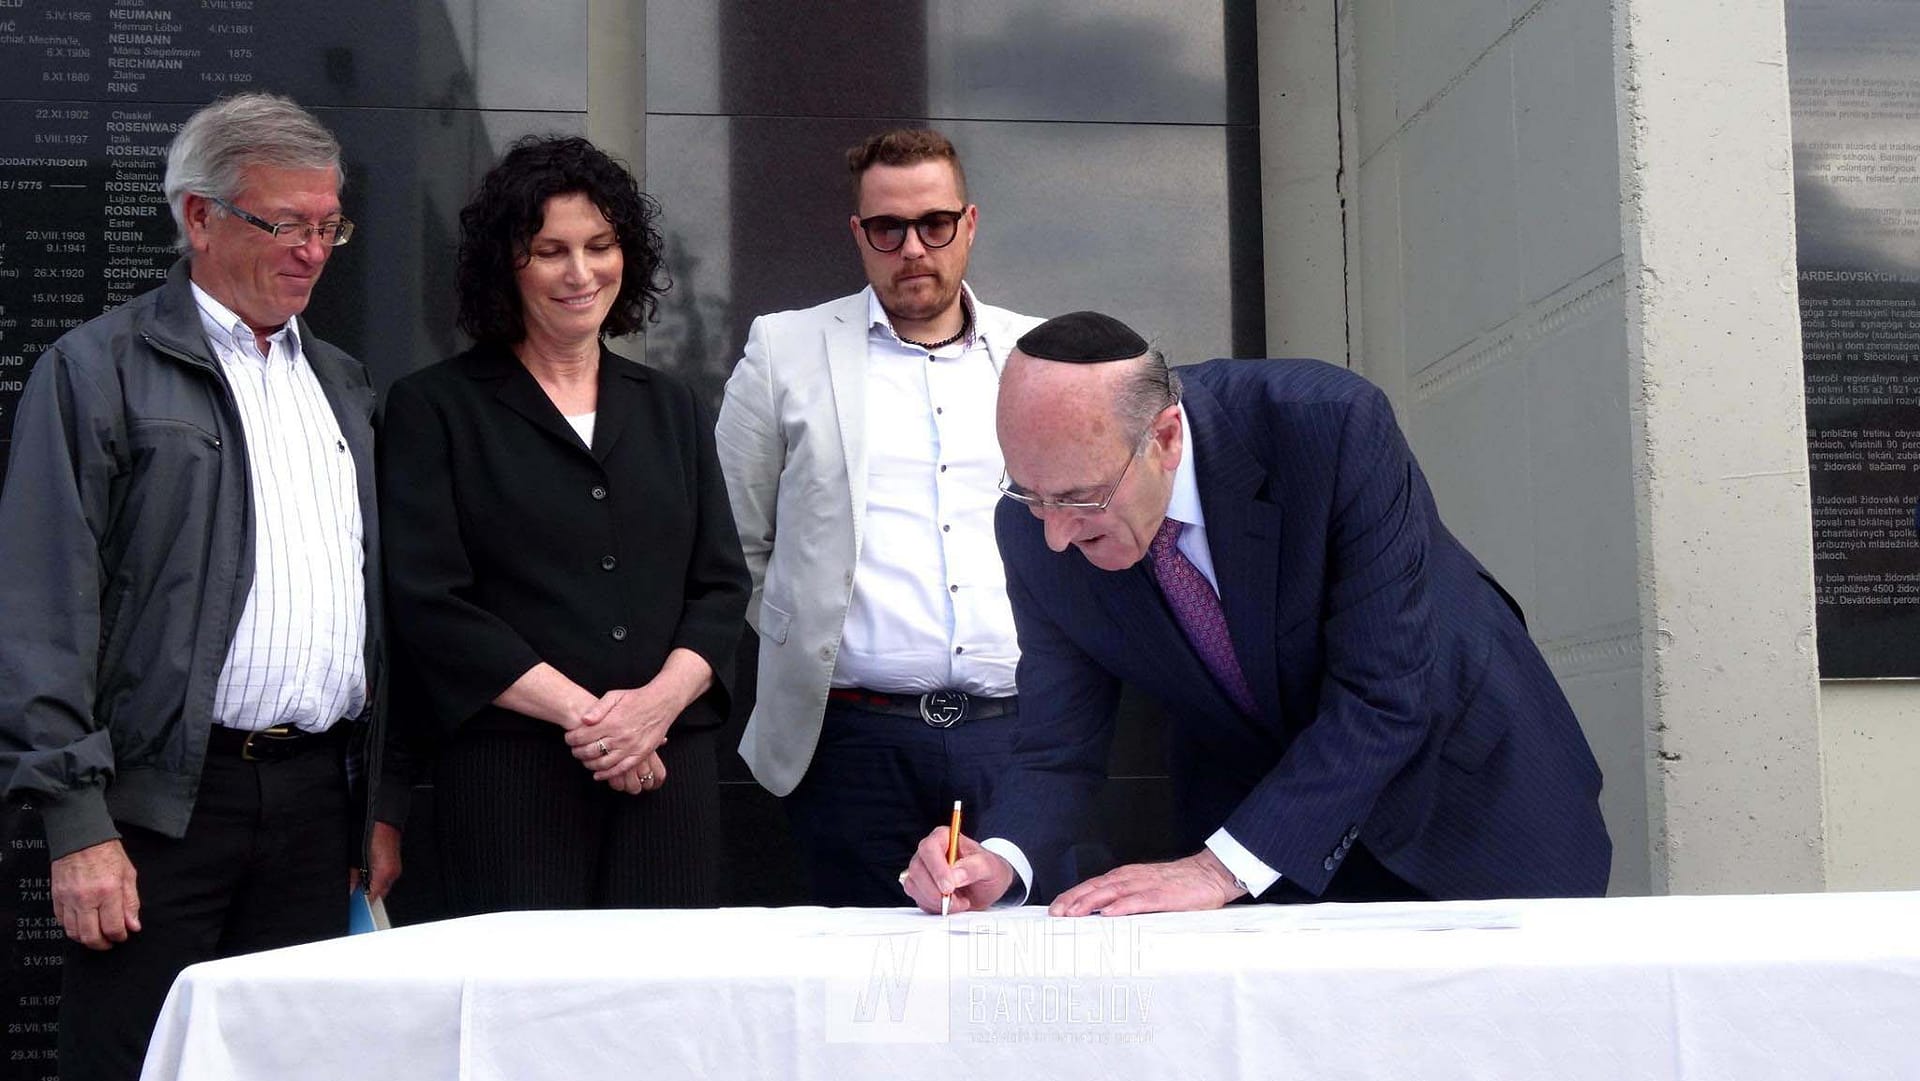 Mr. Emil A. Fish signs the Memorandum between our organization and UZZNO (the Central Union of Jewish Religious Communities in Slovakia) for the restoration of Beith Hamidrash.